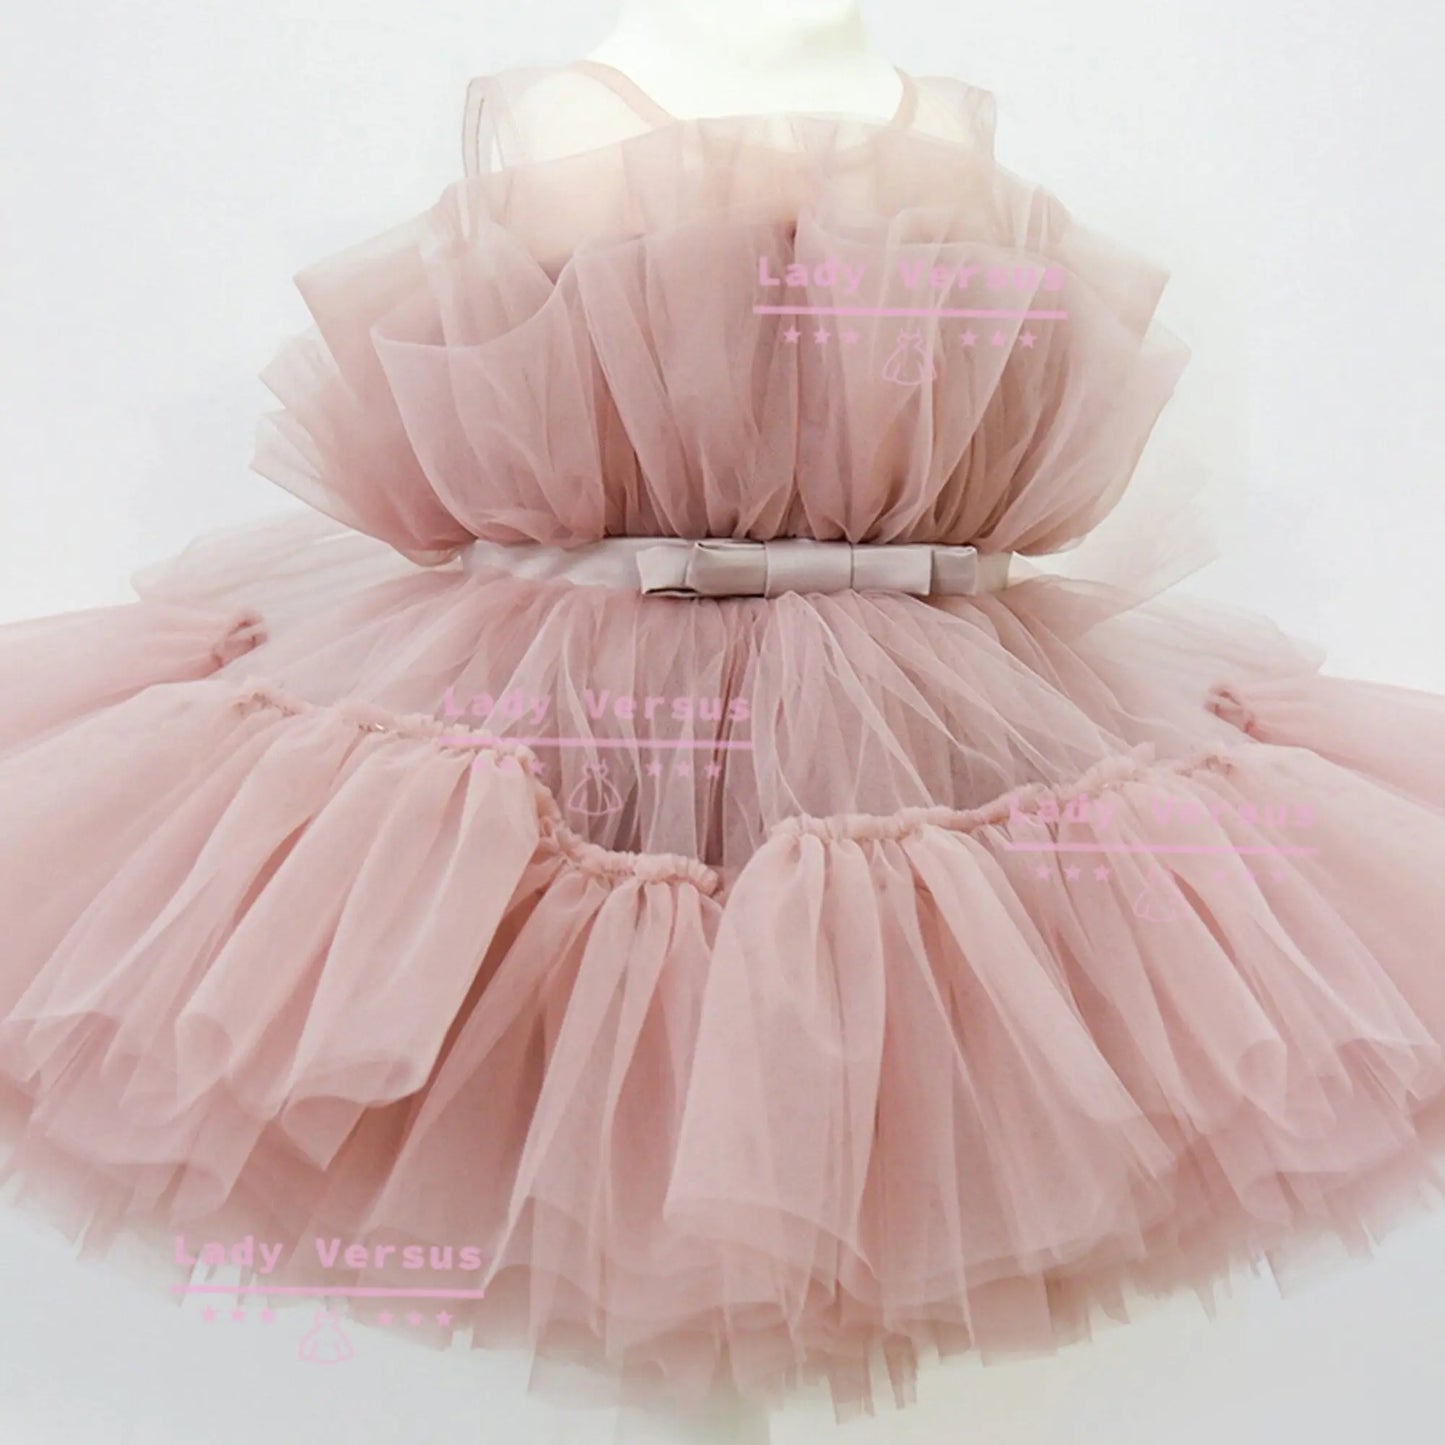 More Colours/ Baby girls party dress/Baby Girl 1st Birthday dress /  Girl dress/Flower girls dress/ Princess  dress/ Birthday dress Lady Versus